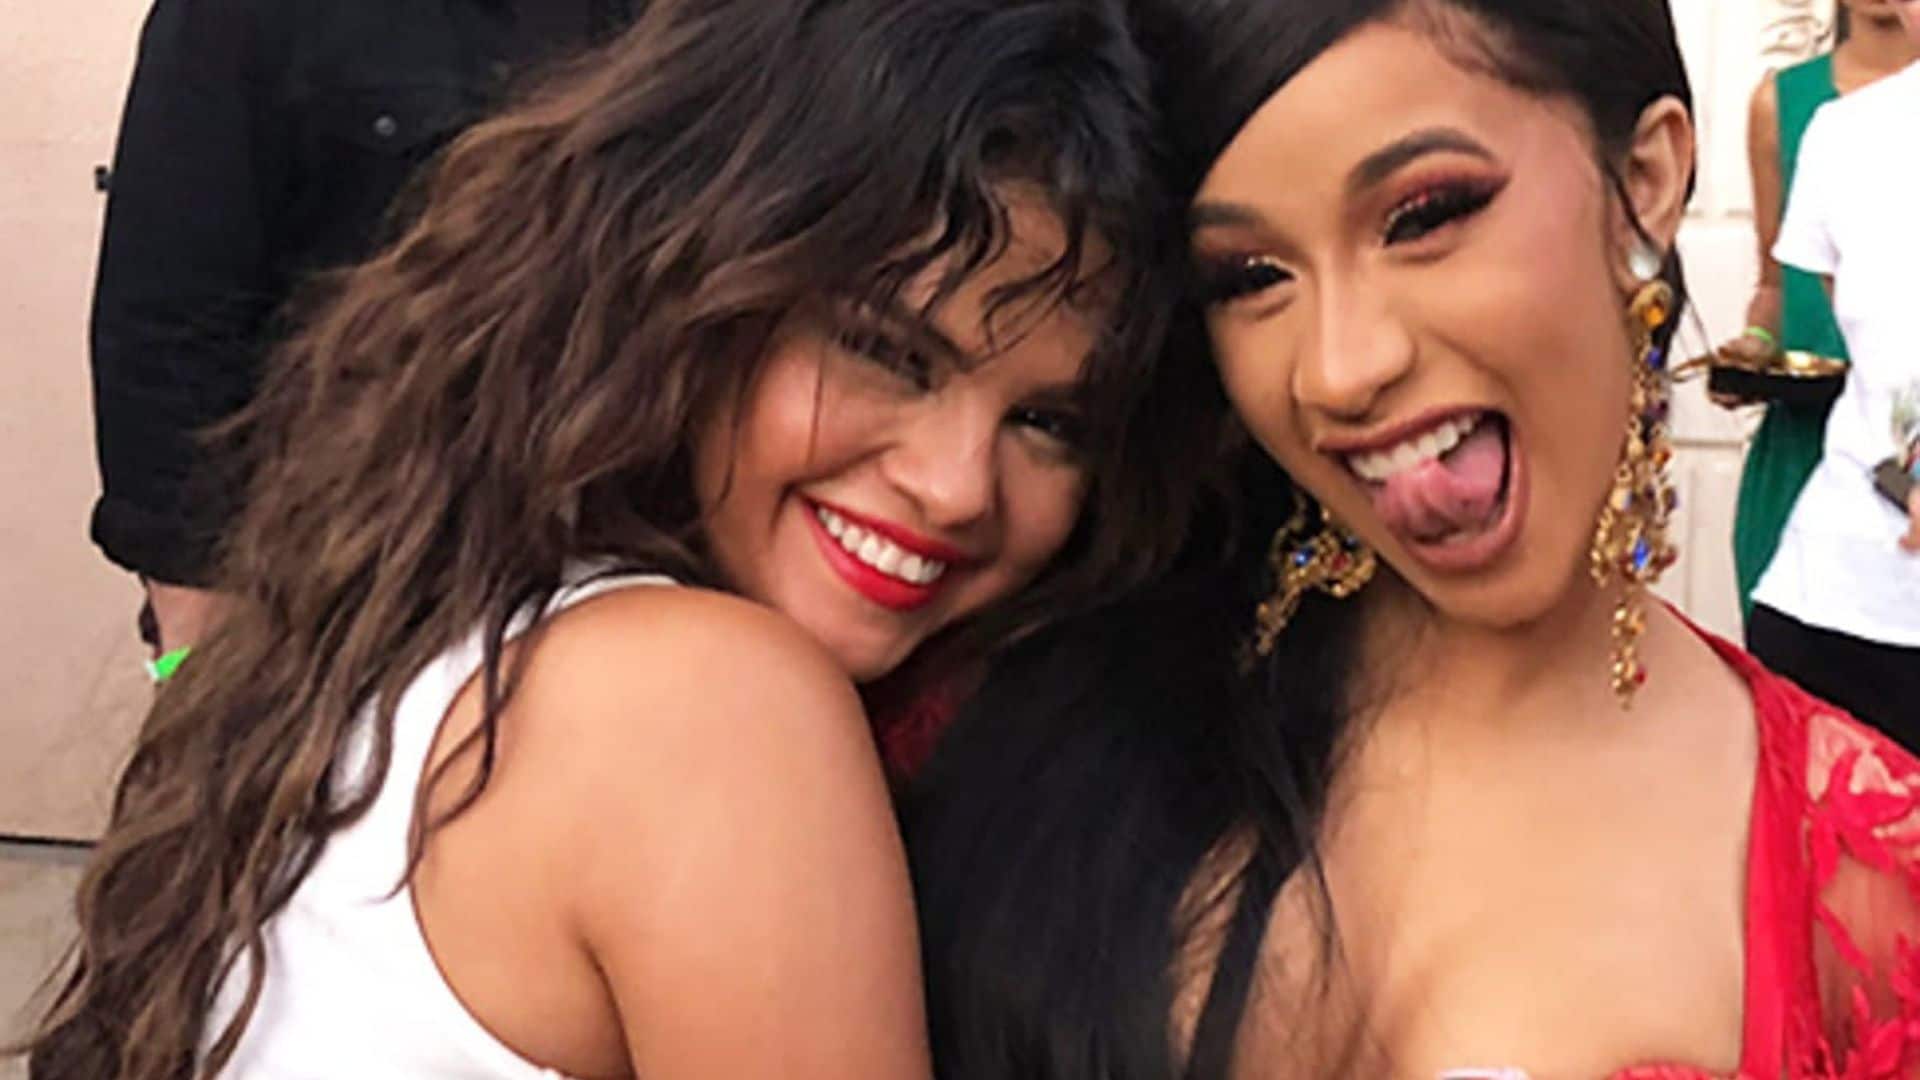 Cardi B defends Selena Gomez urging her to reconsider quitting music